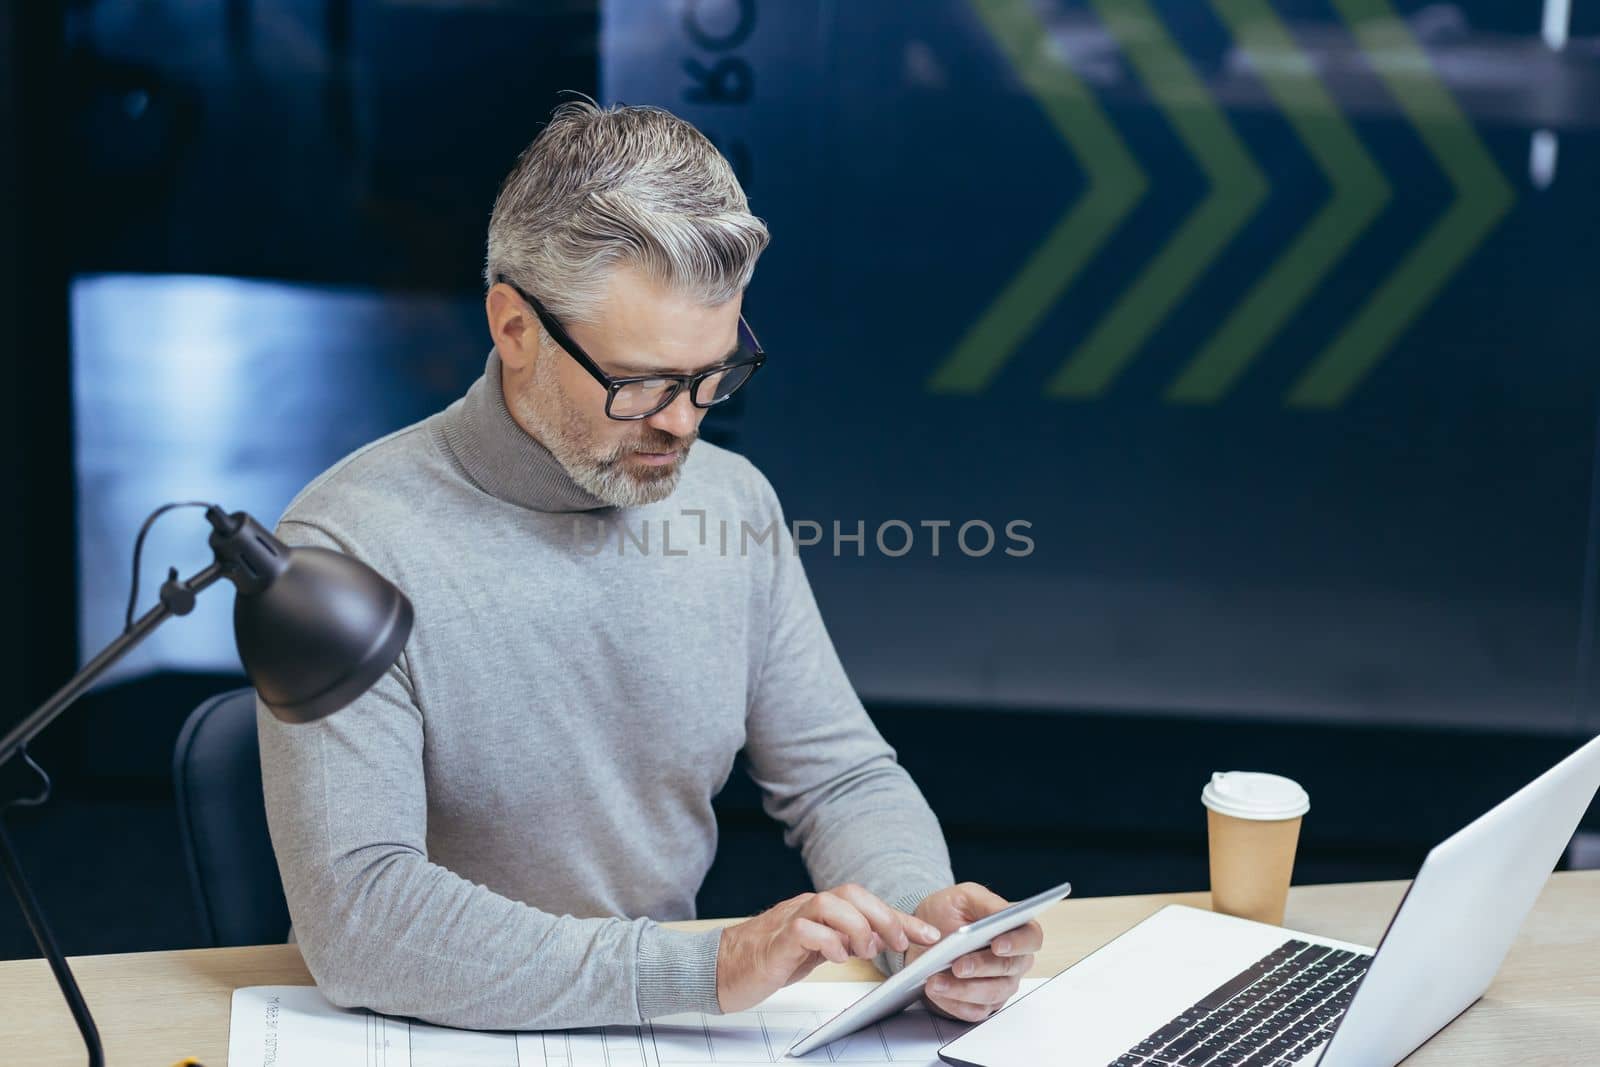 Serious thinking gray-haired businessman working inside office with laptop, senior man using tablet computer browsing internet pages reading online news.